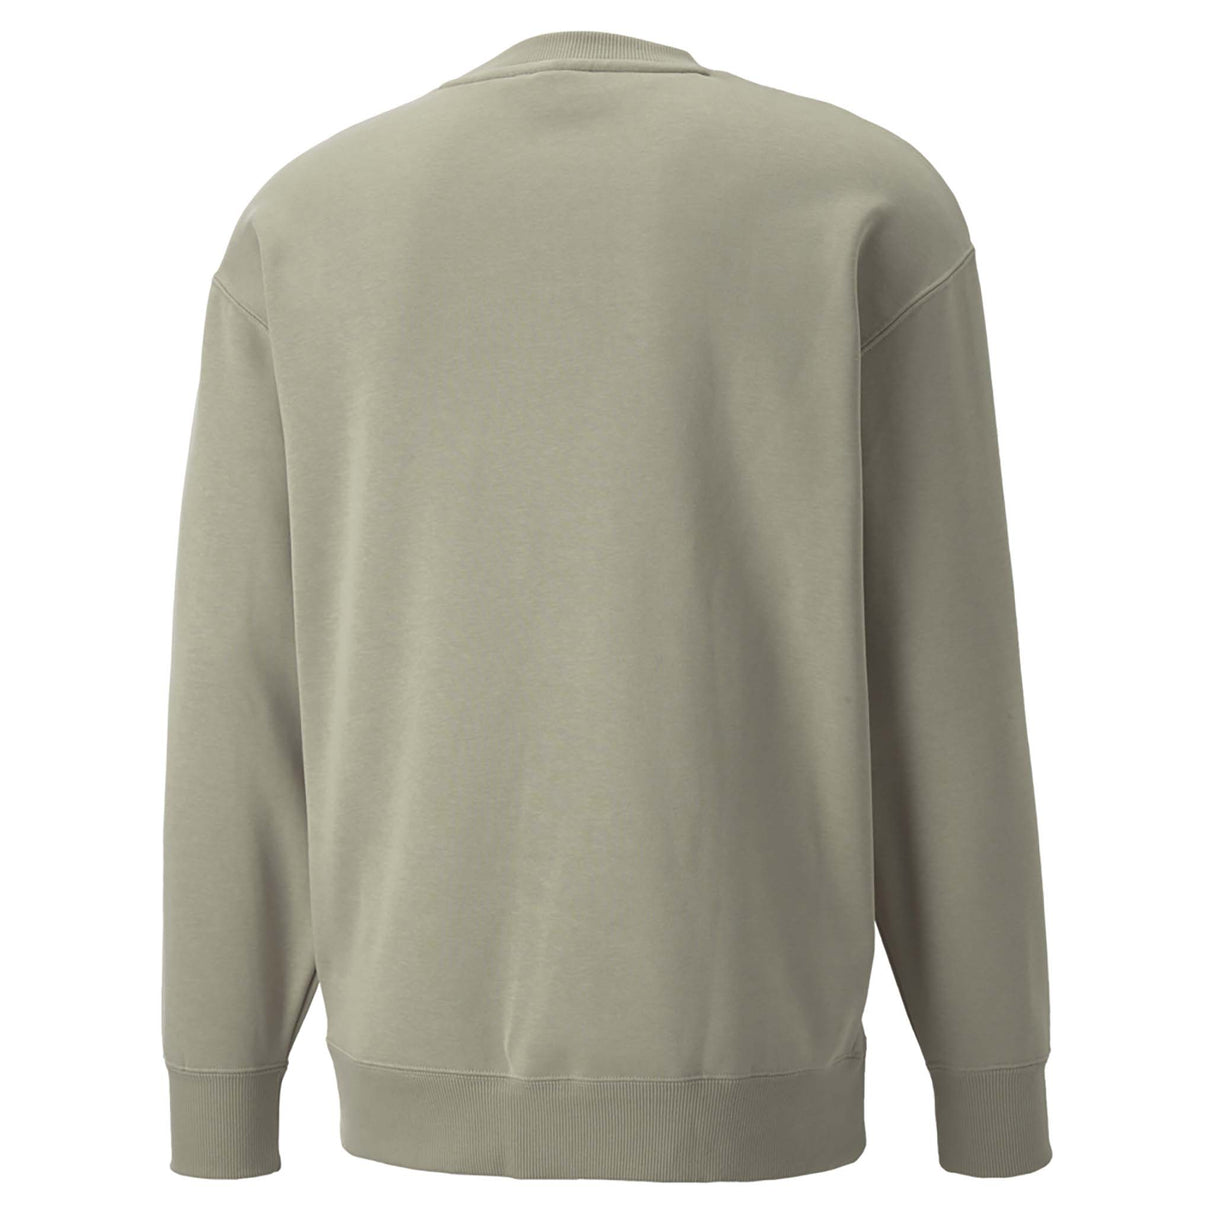 Puma Classics Relaxed Crew chandail gris galet homme dos